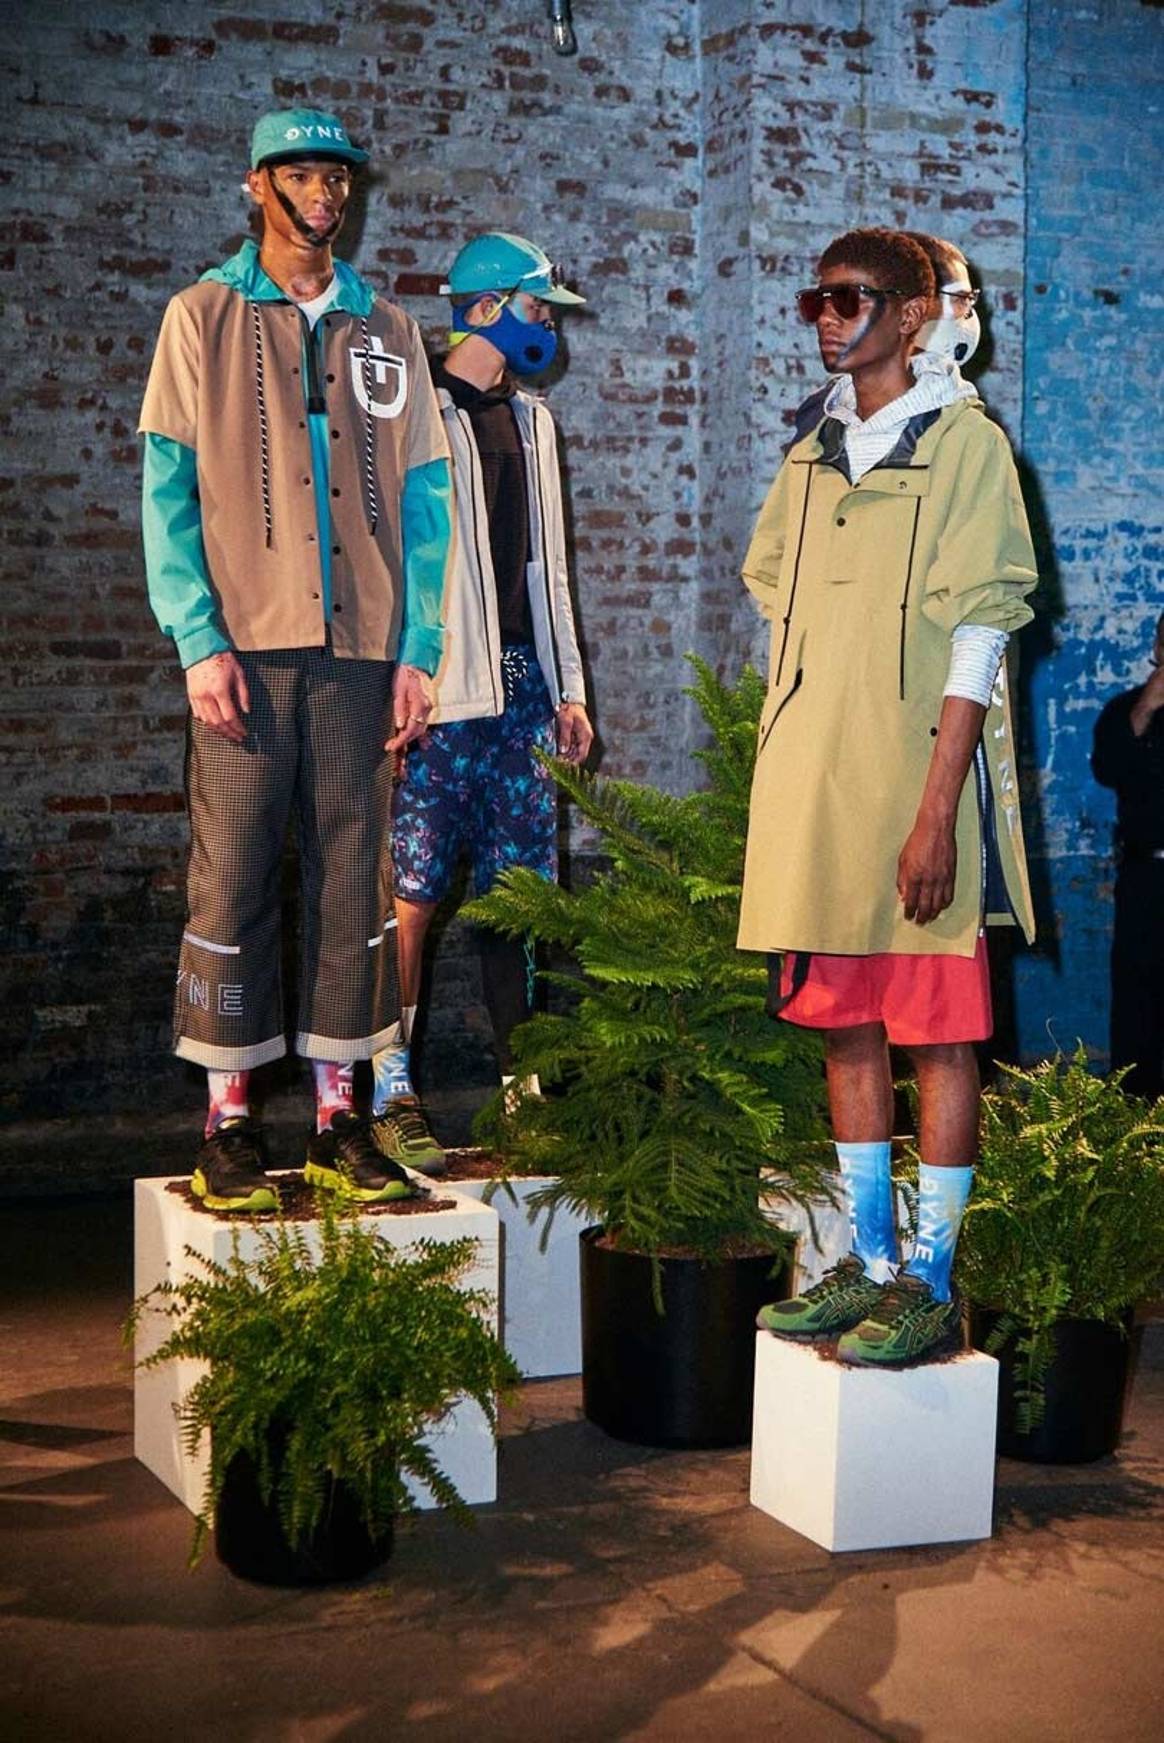 Dyne fuses fashion, performance and technology st NYFW: Men’s